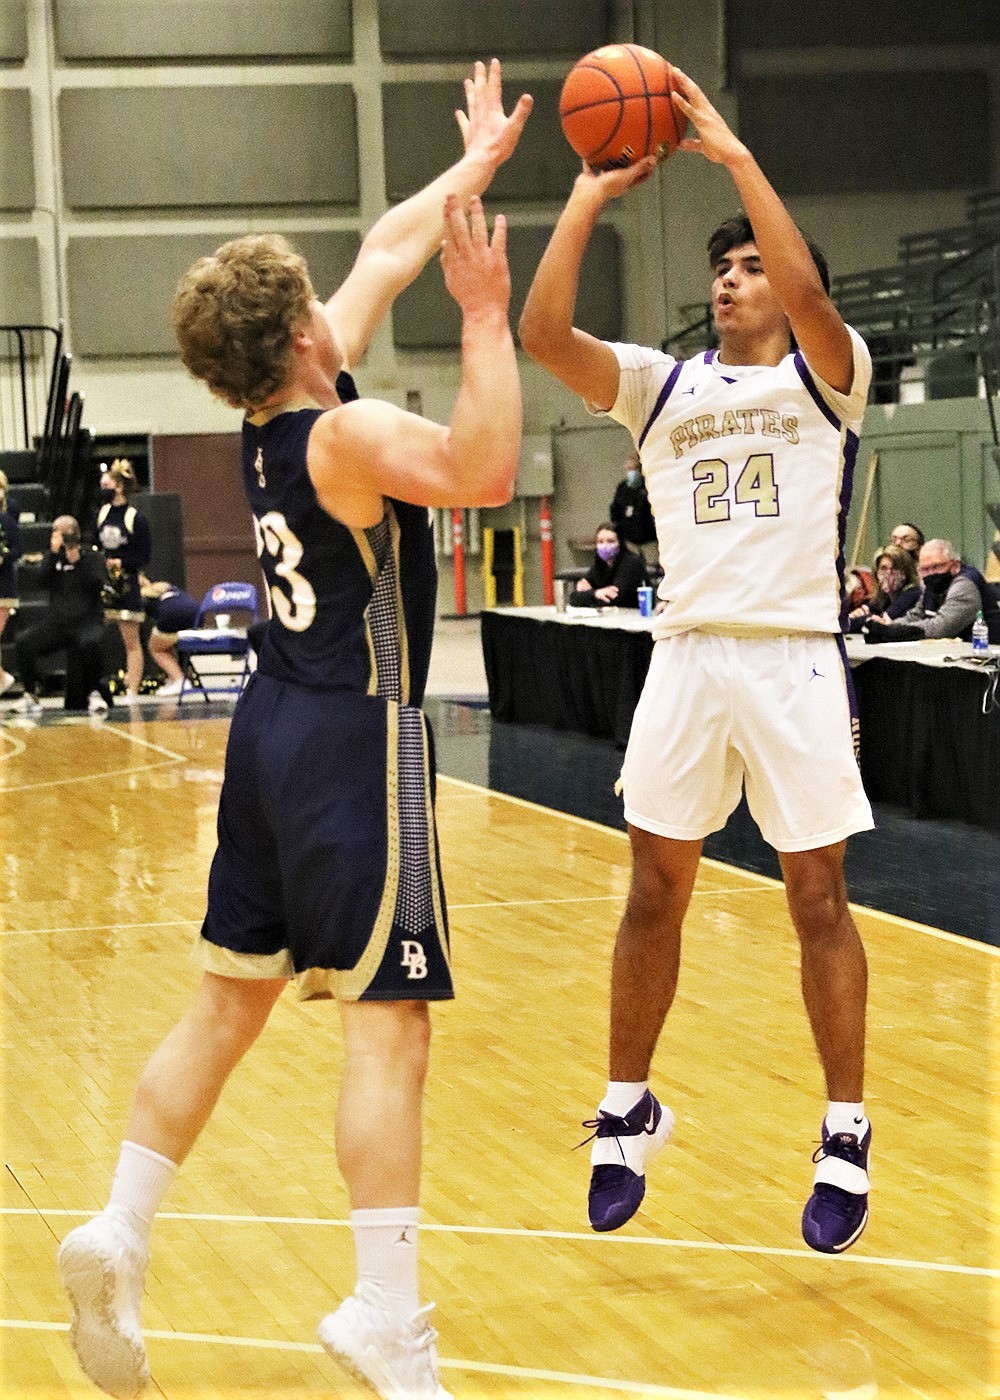 Darian Williams fires off a 3-pointer against Dillon in the championship game Saturday at Butte. (Courtesy of Bob Gunderson)